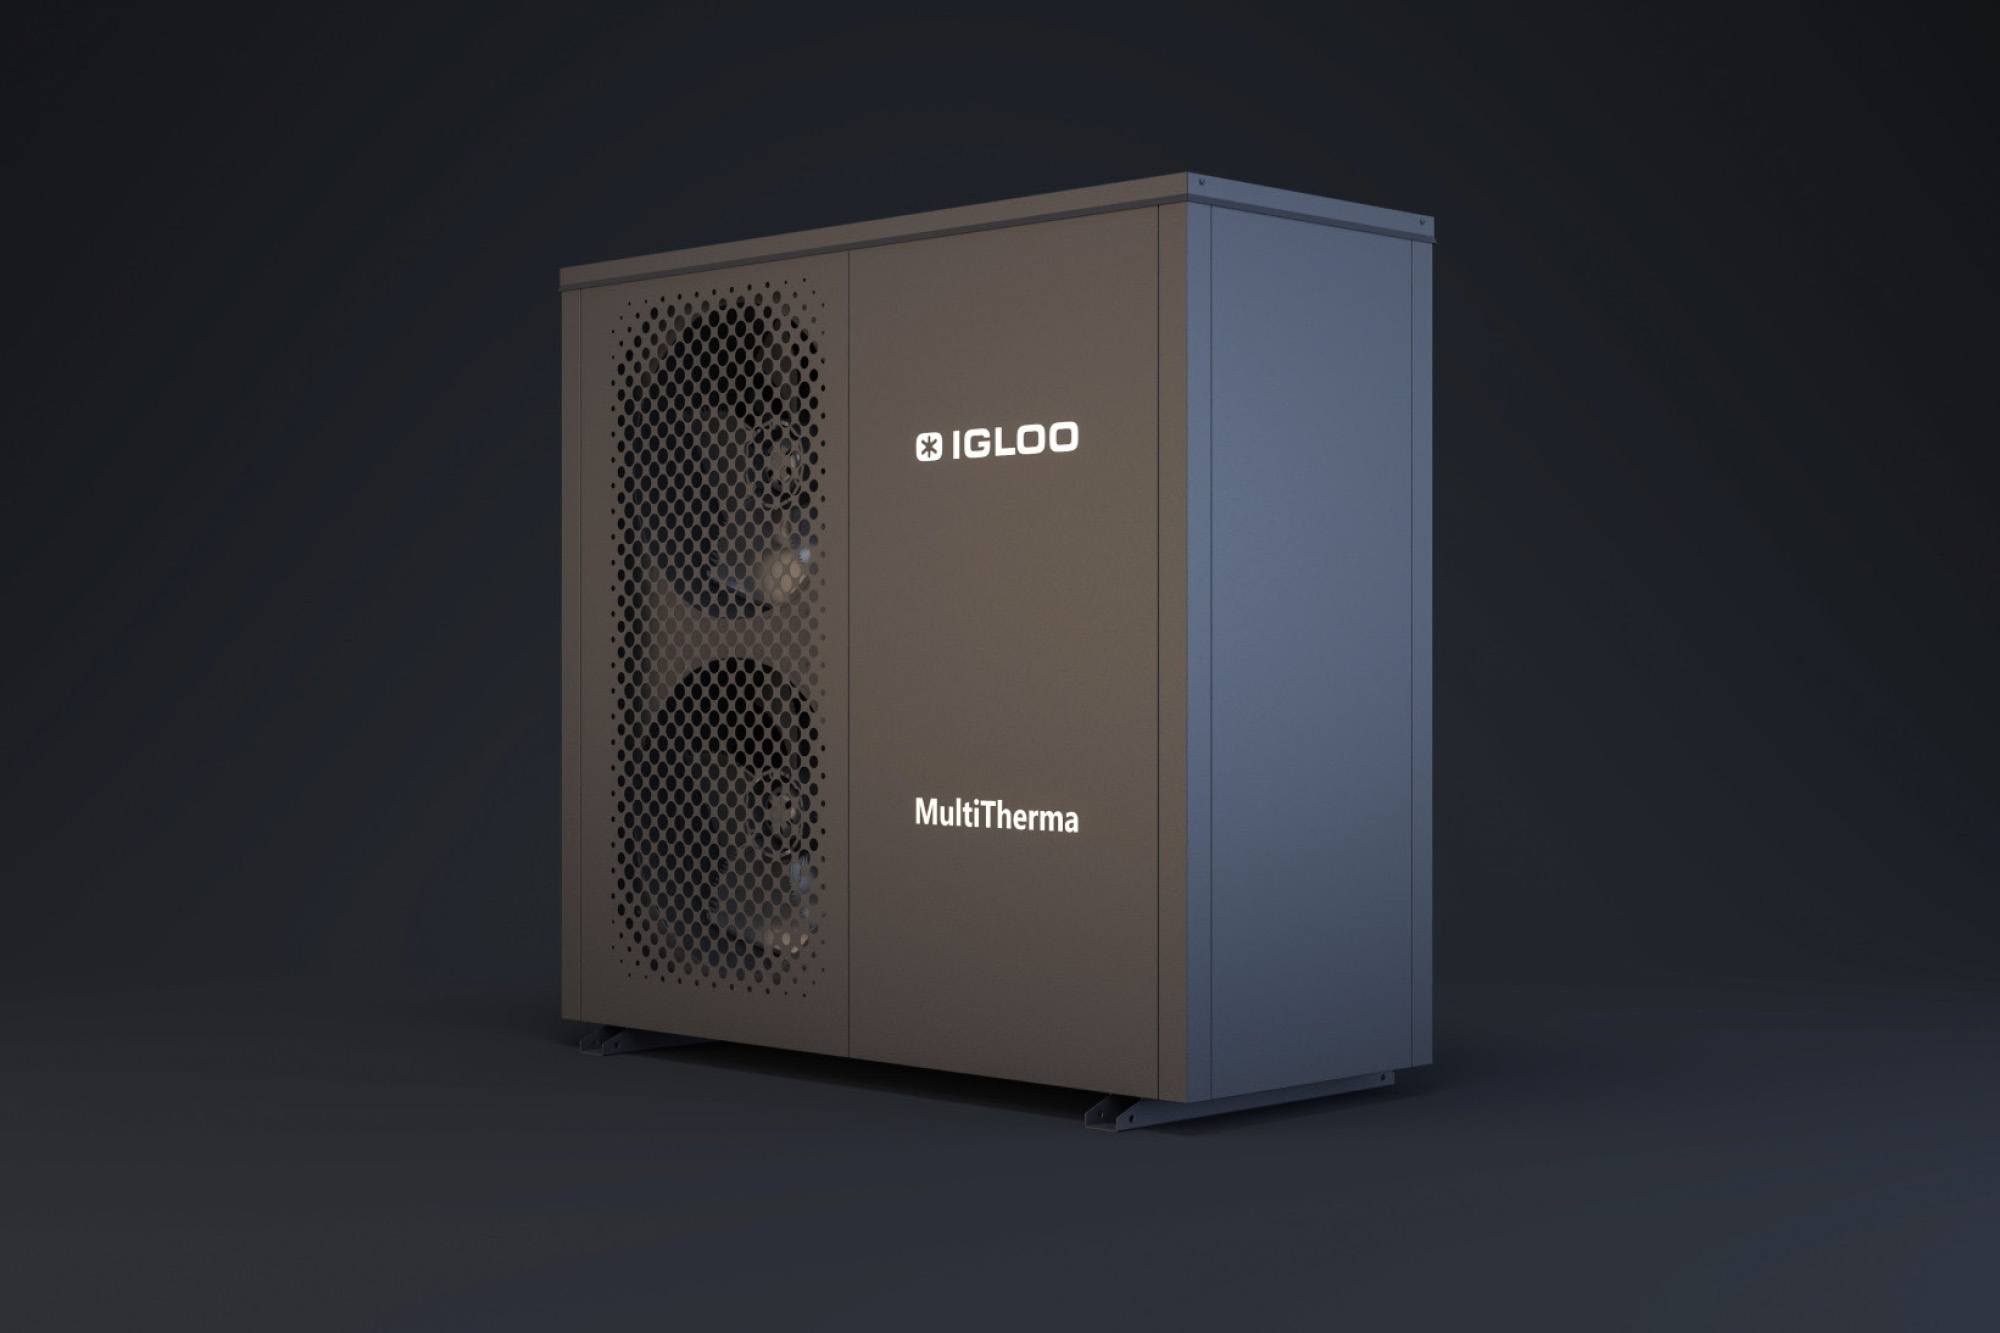 Discover IGLOO MultiTherma – innovative heat pump designed and produced by IGLOO